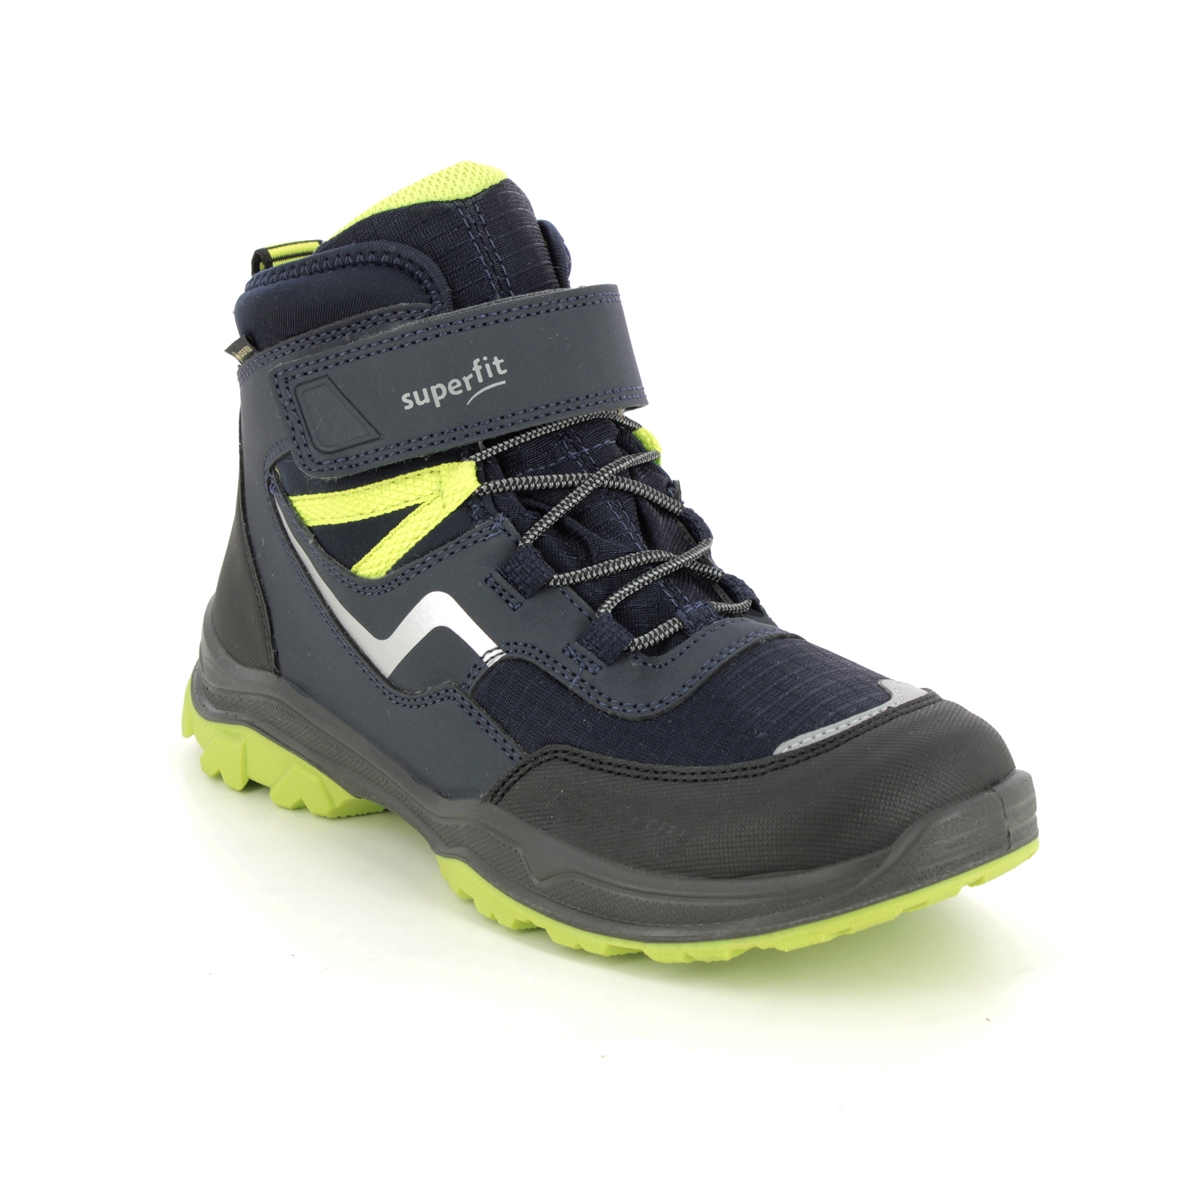 Superfit Jupiter Bungee Gtx Navy Lime Kids Boys Boots 1000074-8000 In Size 39 In Plain Navy Lime For kids